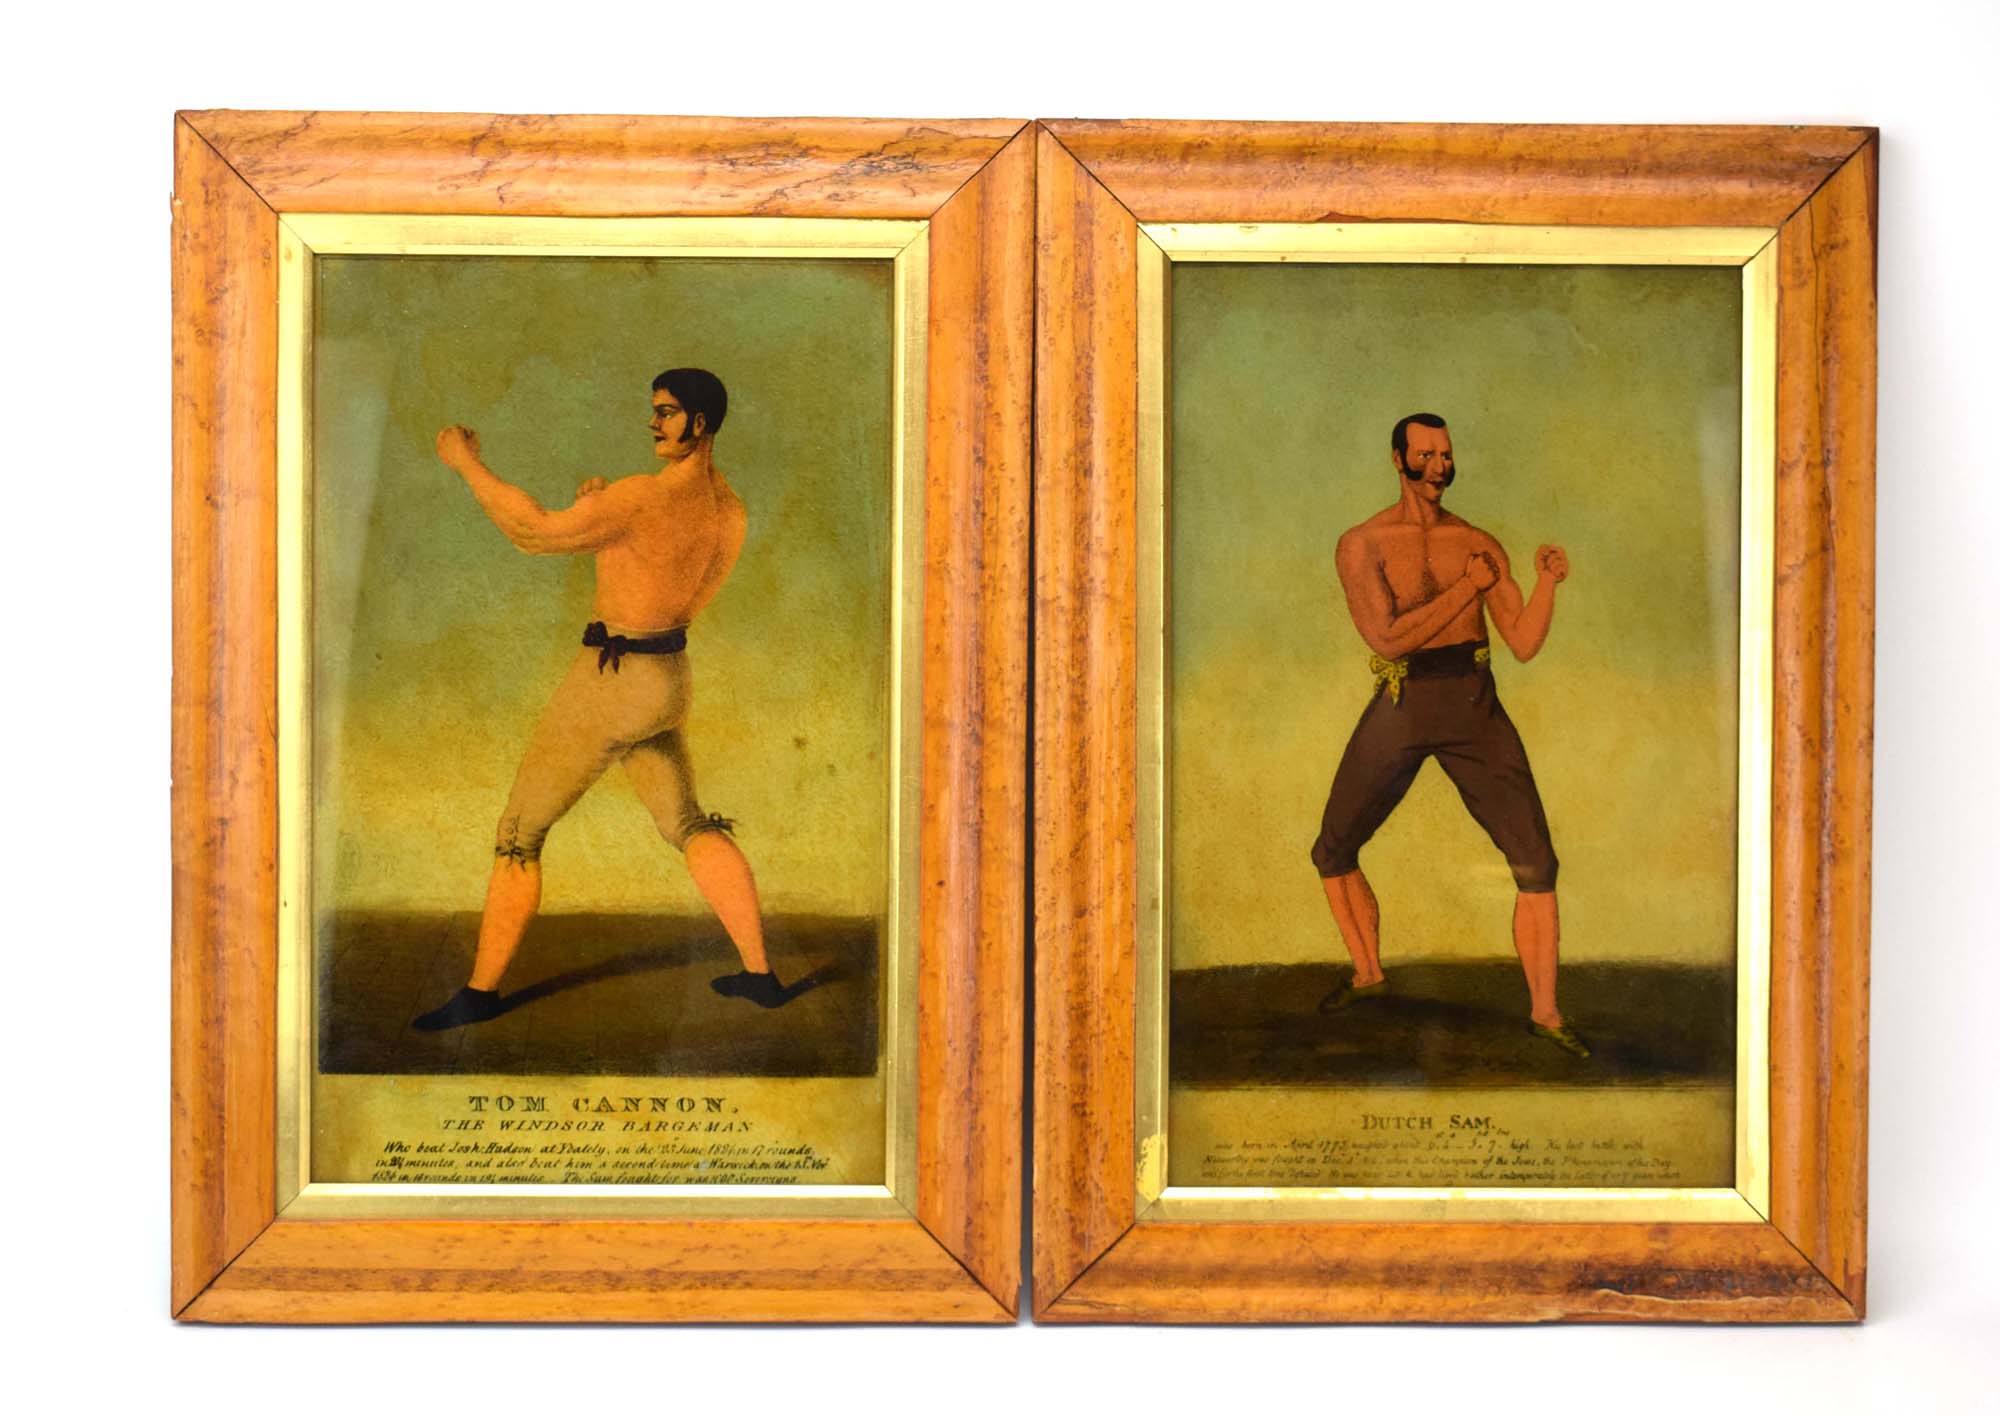 Of Boxing Interest A pair of reverse prints on glass depicting 'Dutch Sam' and Tom Cannon',